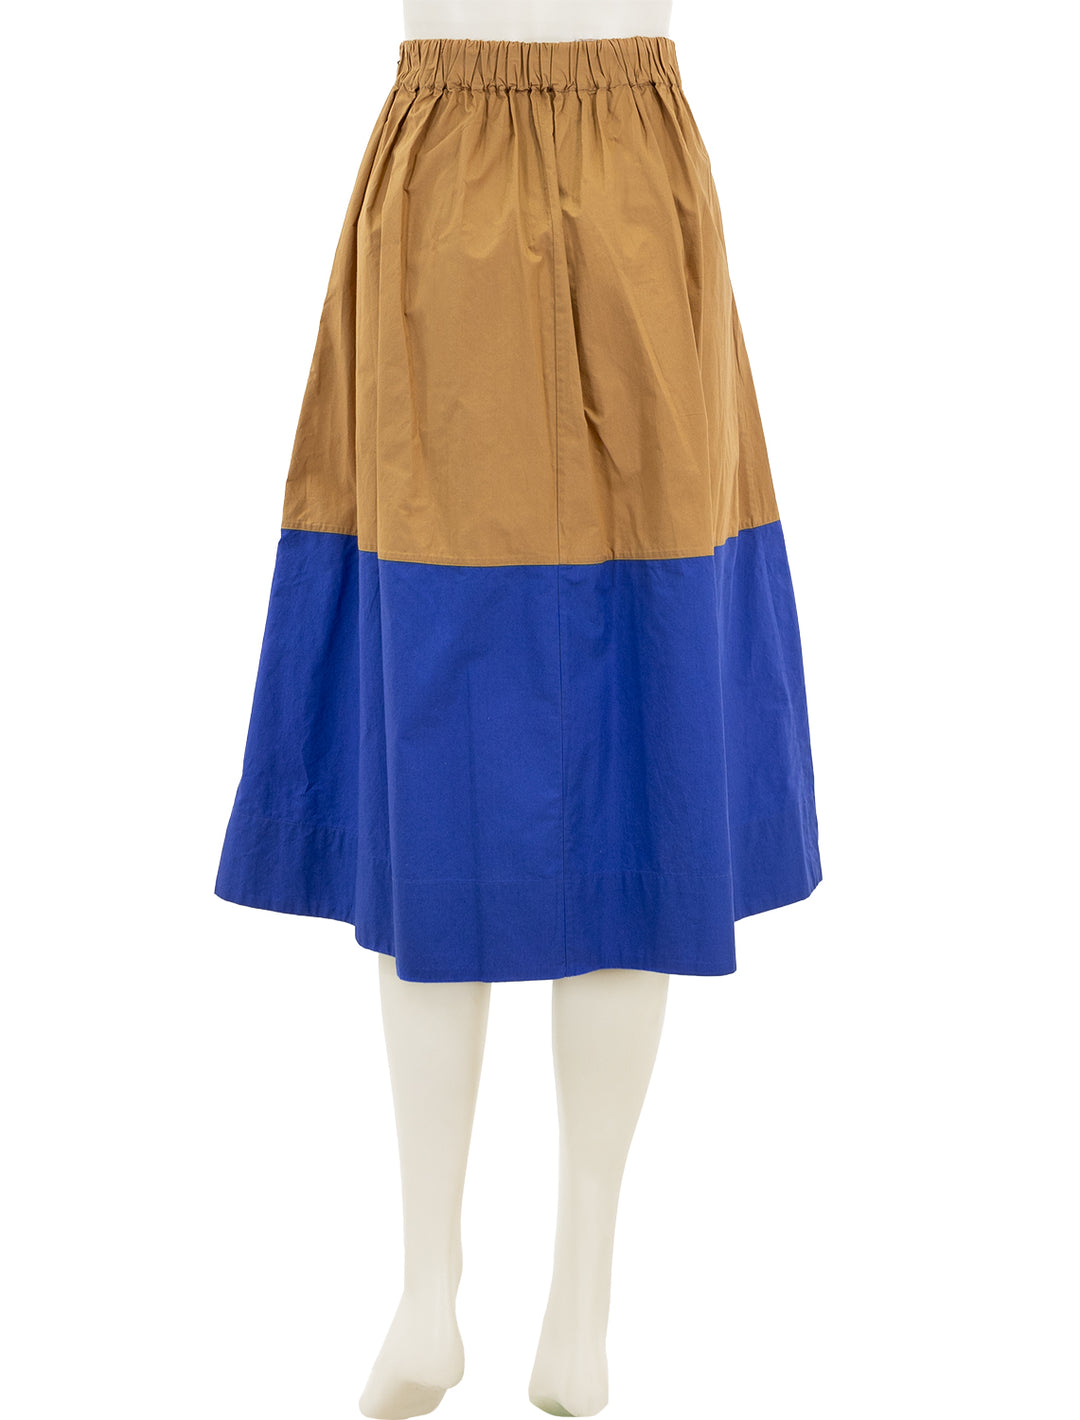 Back view of Clare V.'s genevieve skirt in khaki and cobalt.